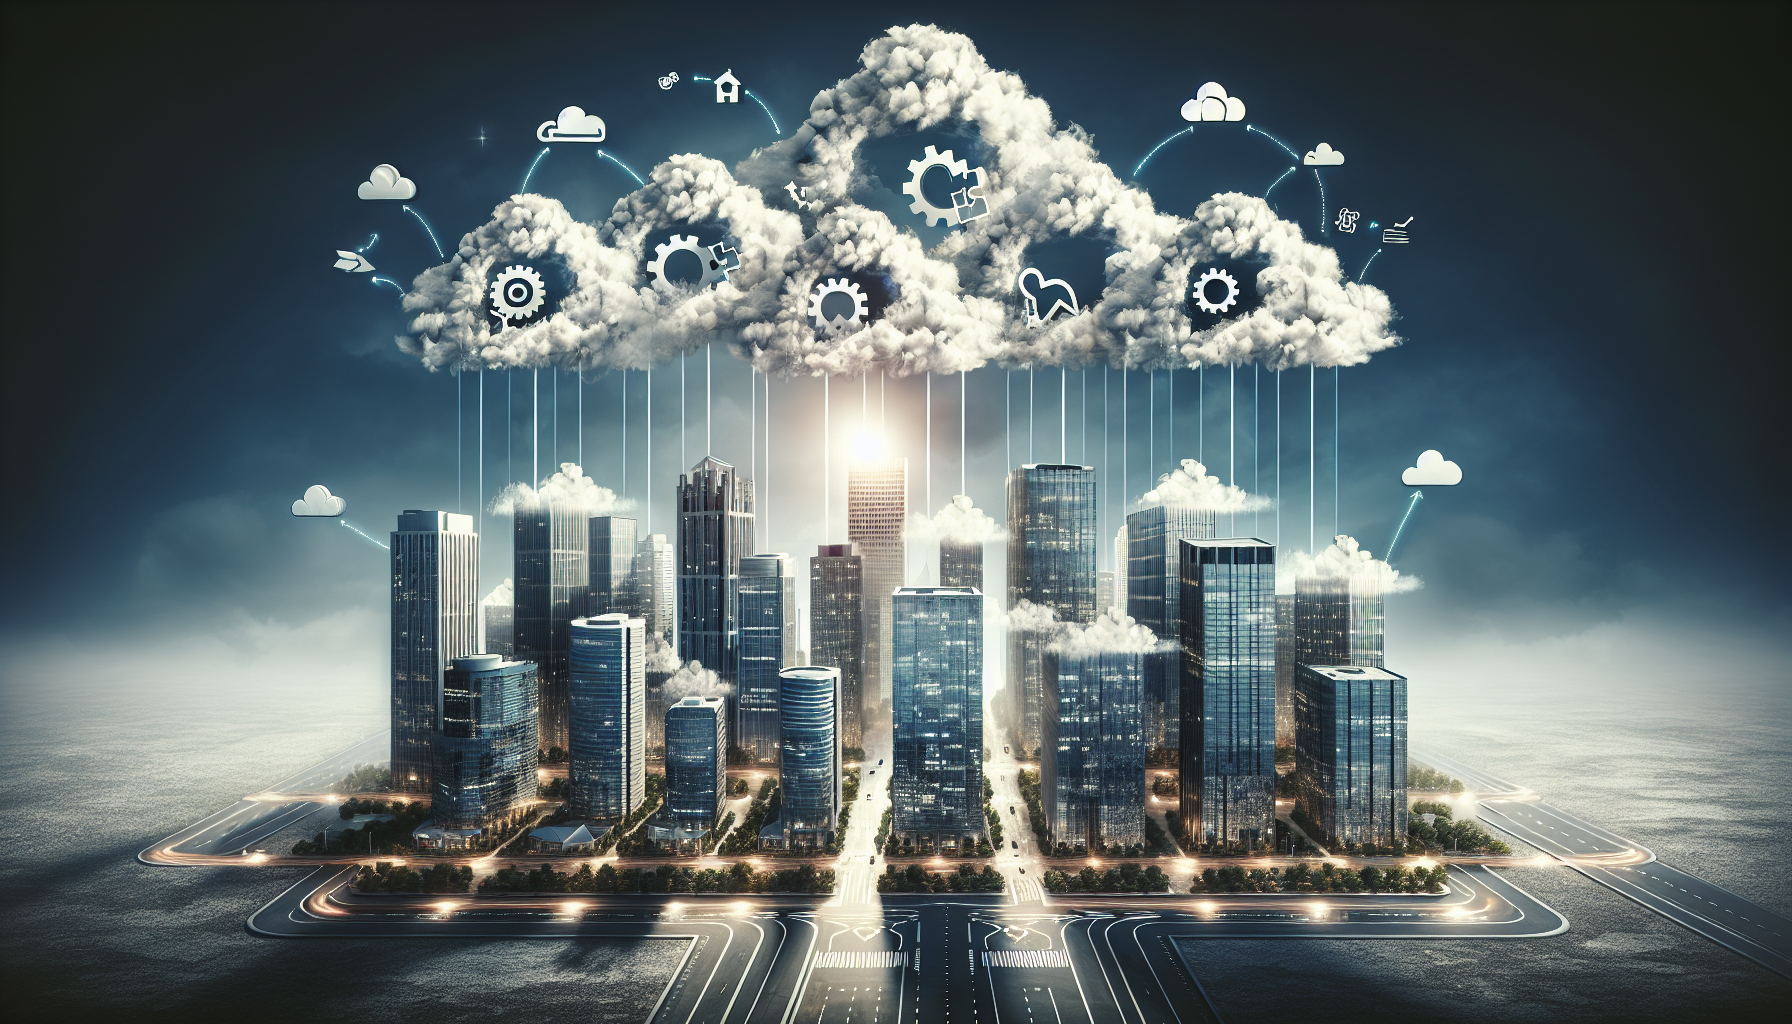 Illustration of cloud-based solutions transforming the business landscape